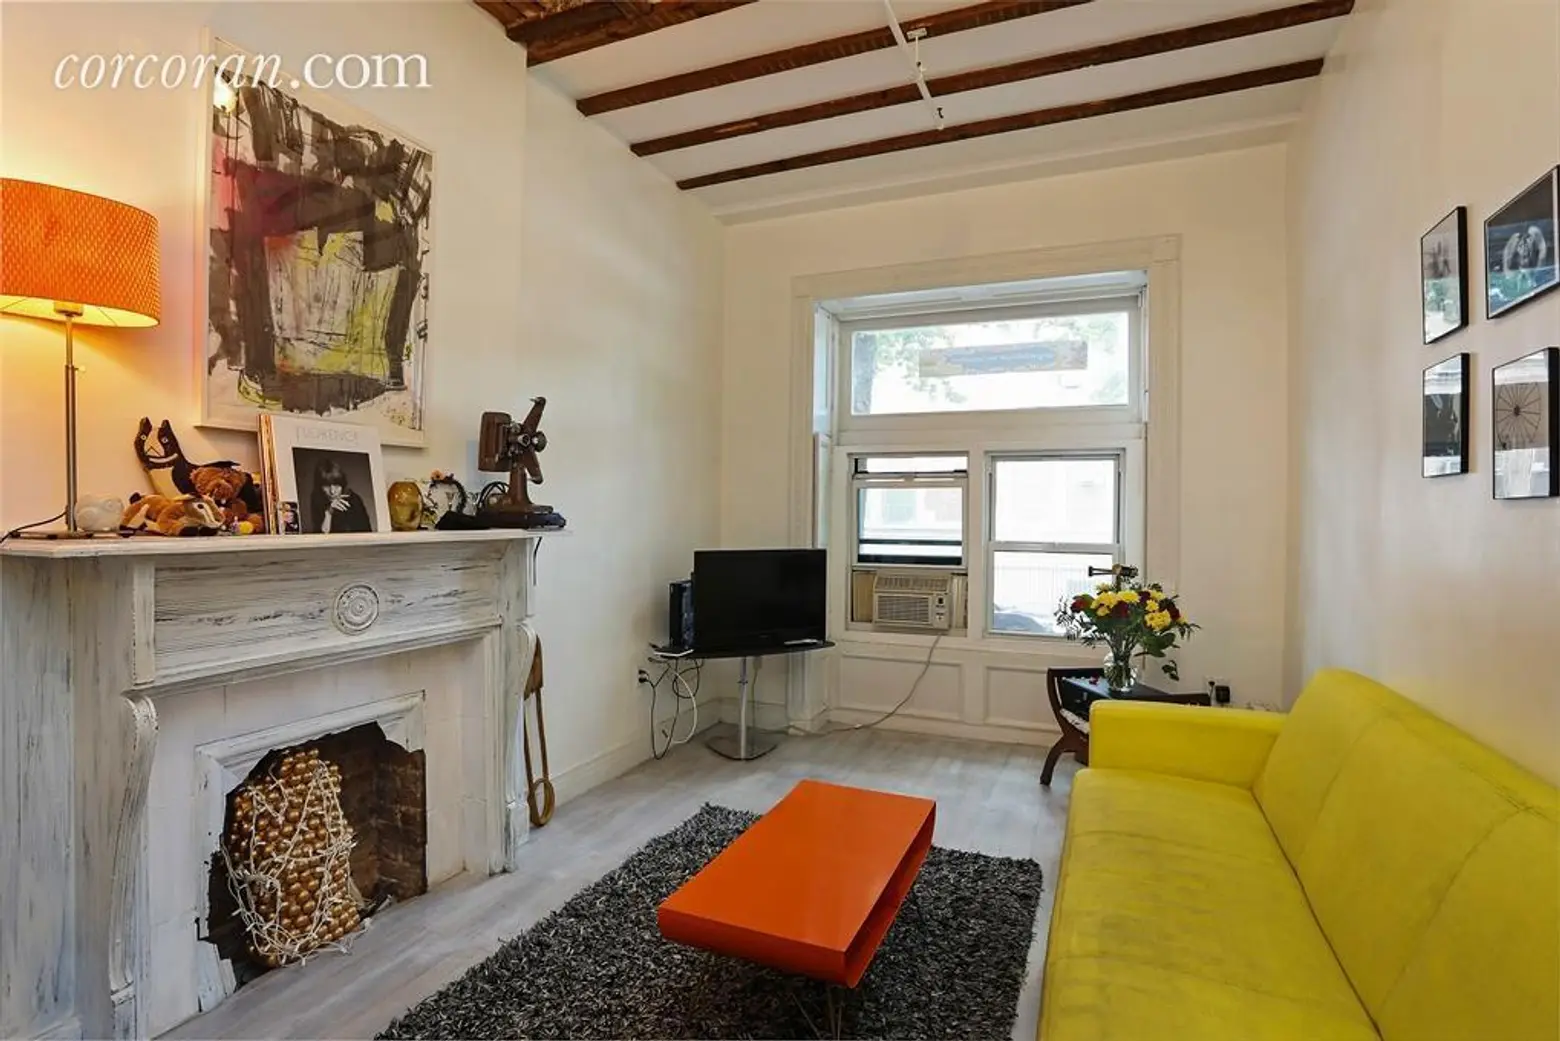 44 Macon Street, Brownstone, Townhouse, Cool Listing, Brooklyn, Brooklyn townhouse for sale